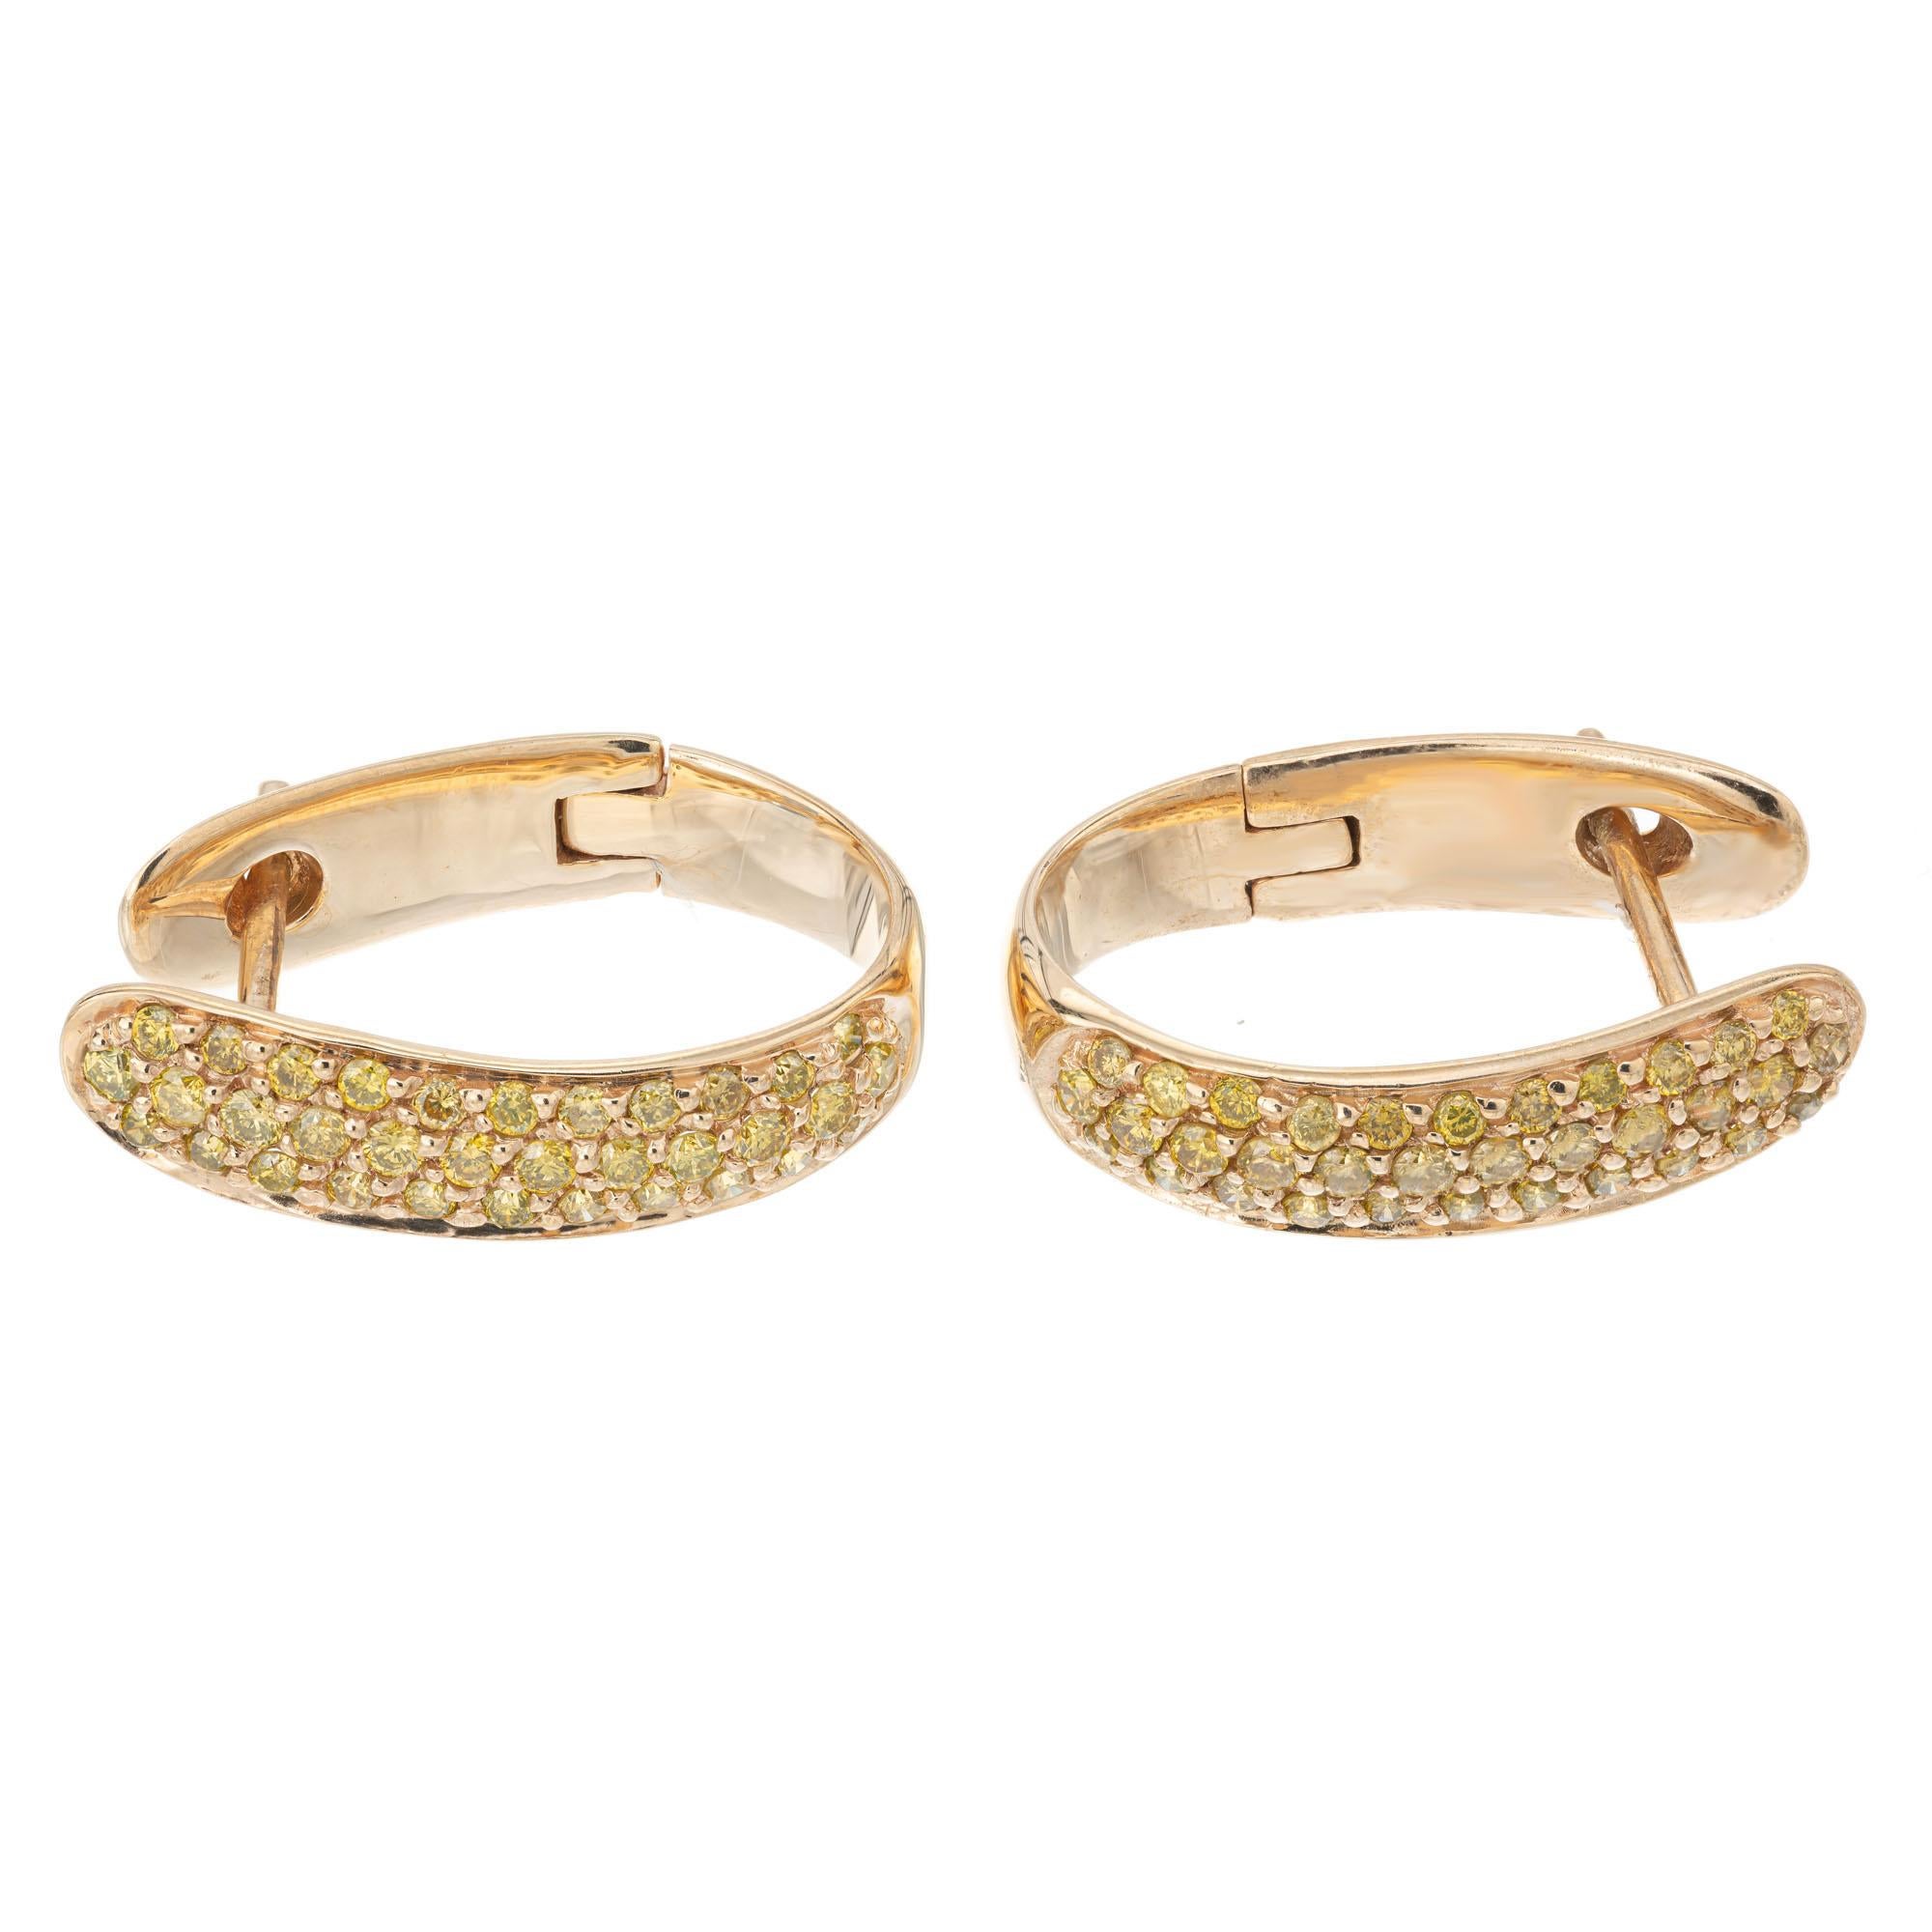 .57 Carat Yellow Diamond Yellow Gold Pave Hoop Earrings In Excellent Condition For Sale In Stamford, CT